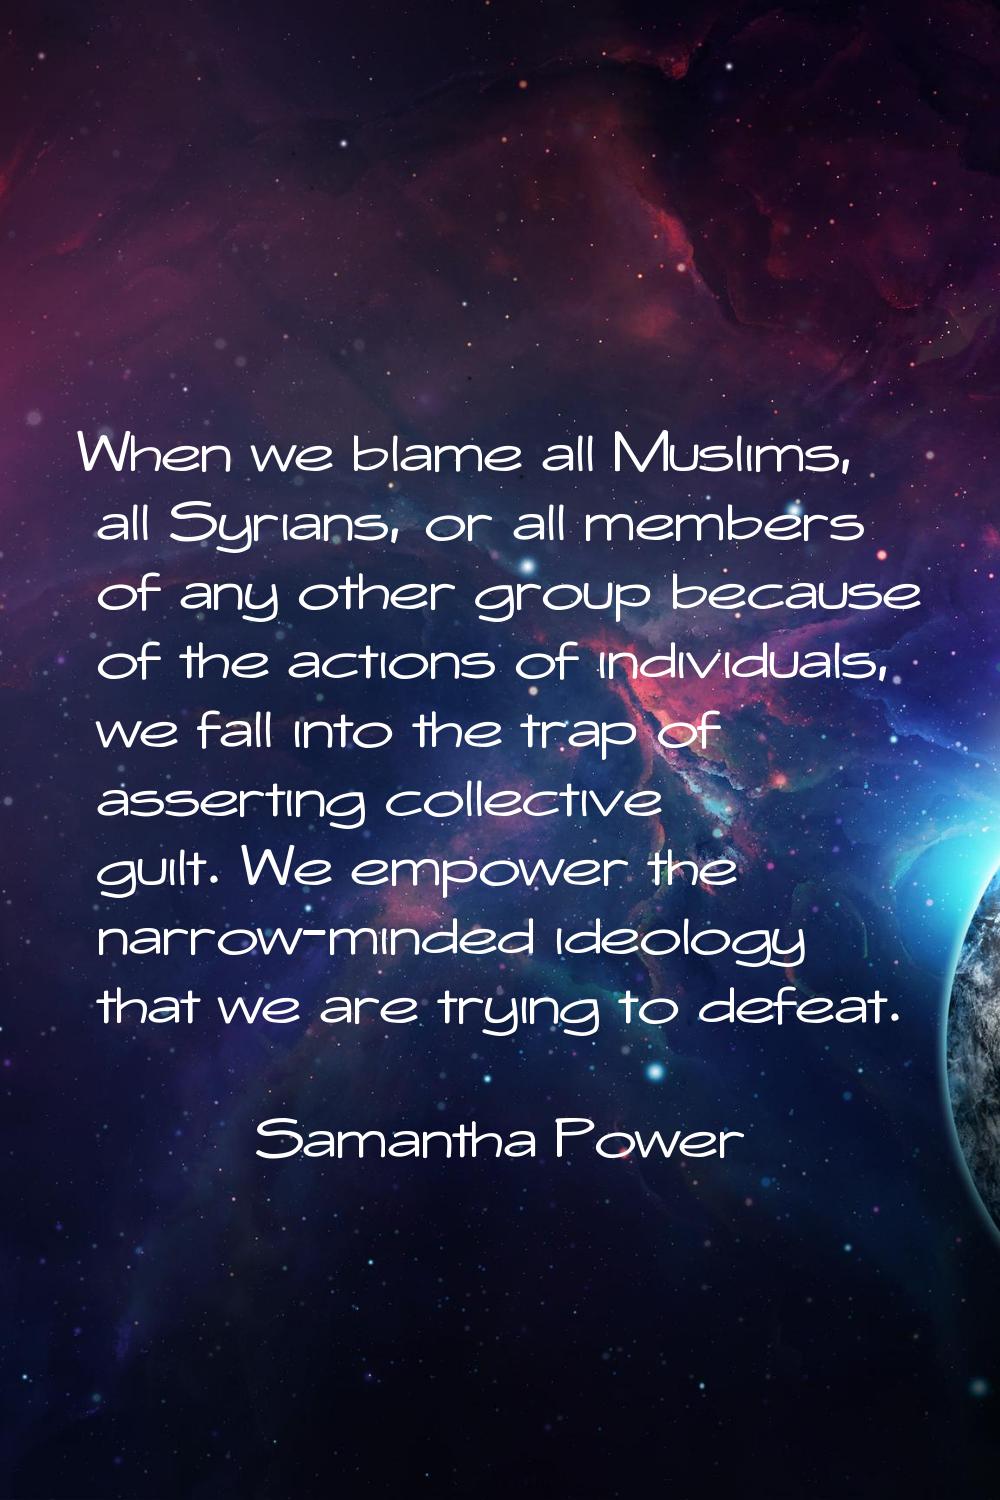 When we blame all Muslims, all Syrians, or all members of any other group because of the actions of